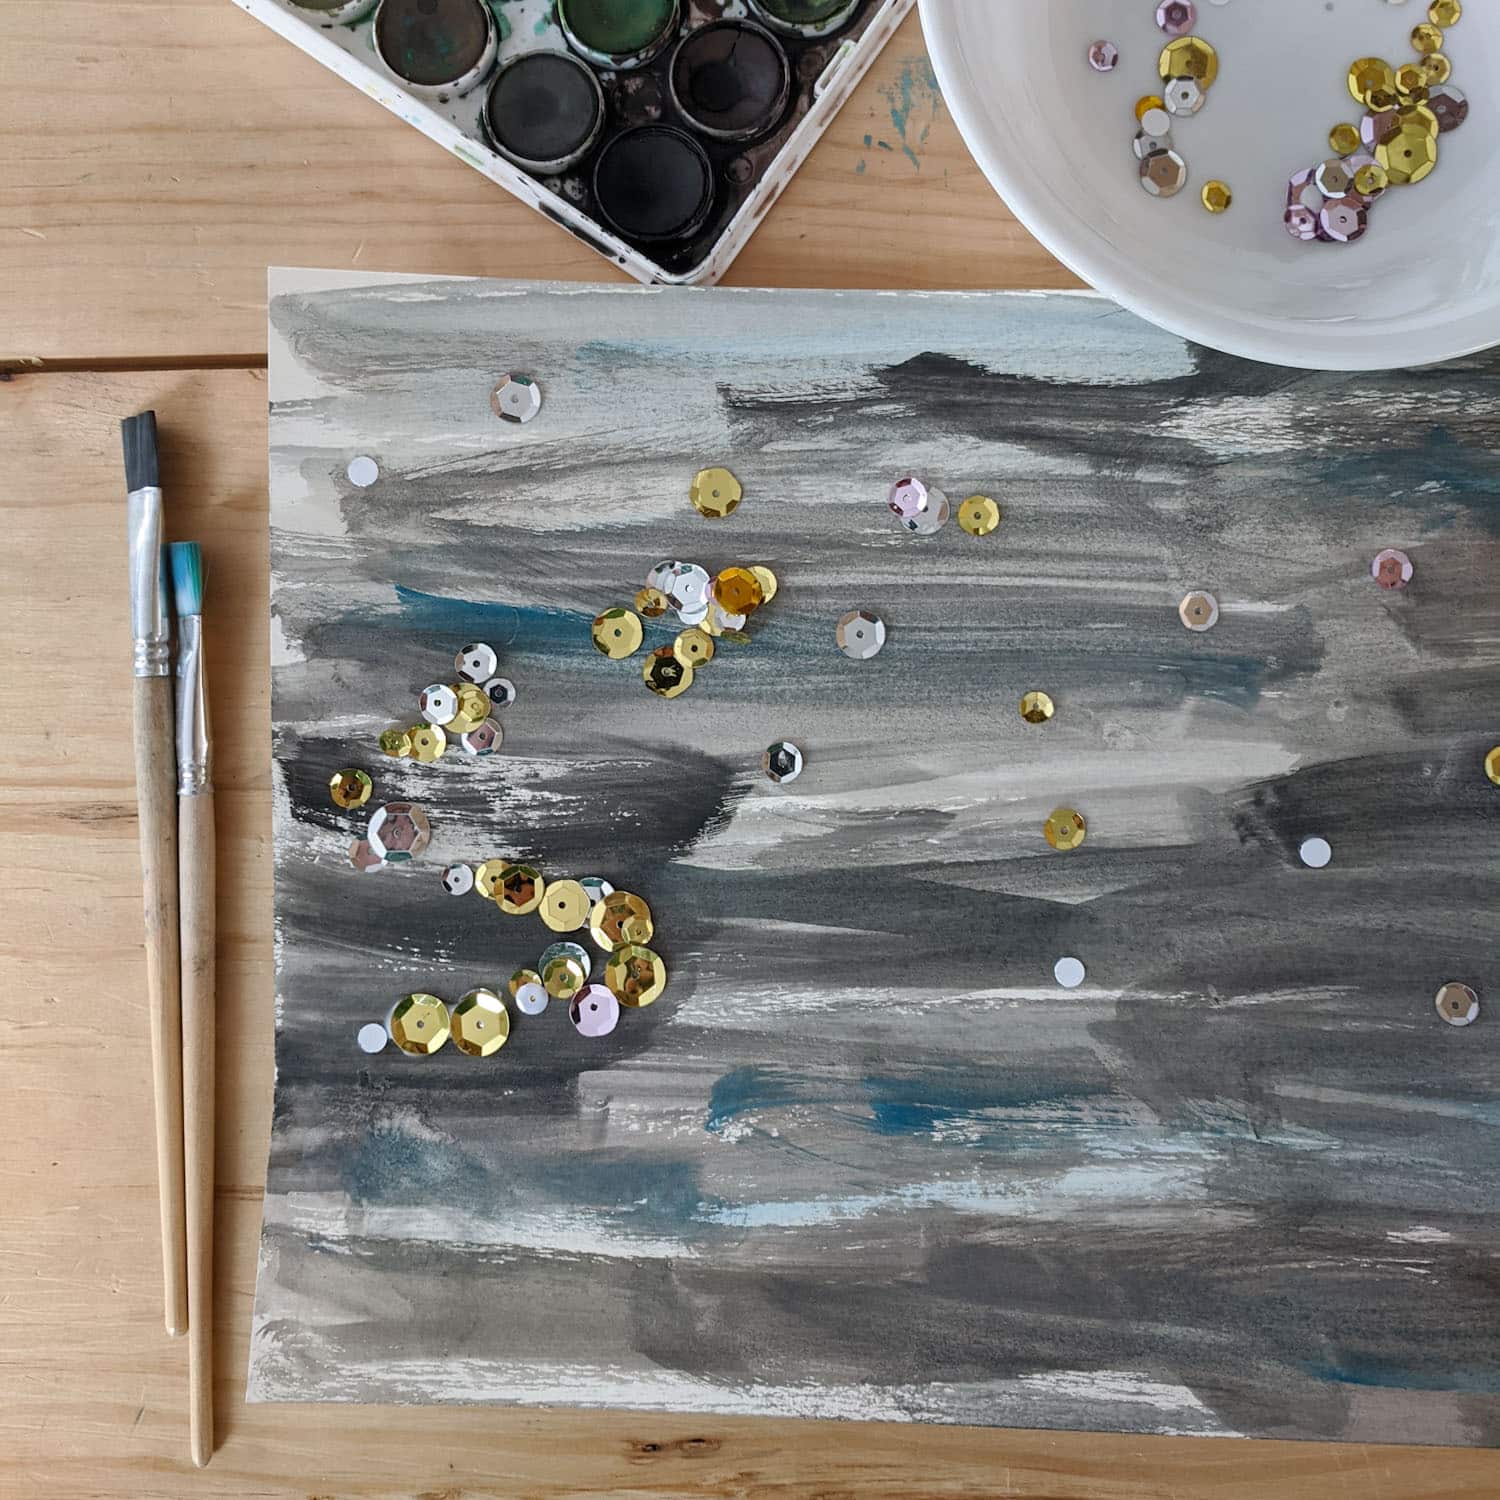 starry night process art on a wooden table made with watercolor paint, sequins, and glue. Two wooden paint brushes right side, watercolor paints above, white bowl with sequins top right.